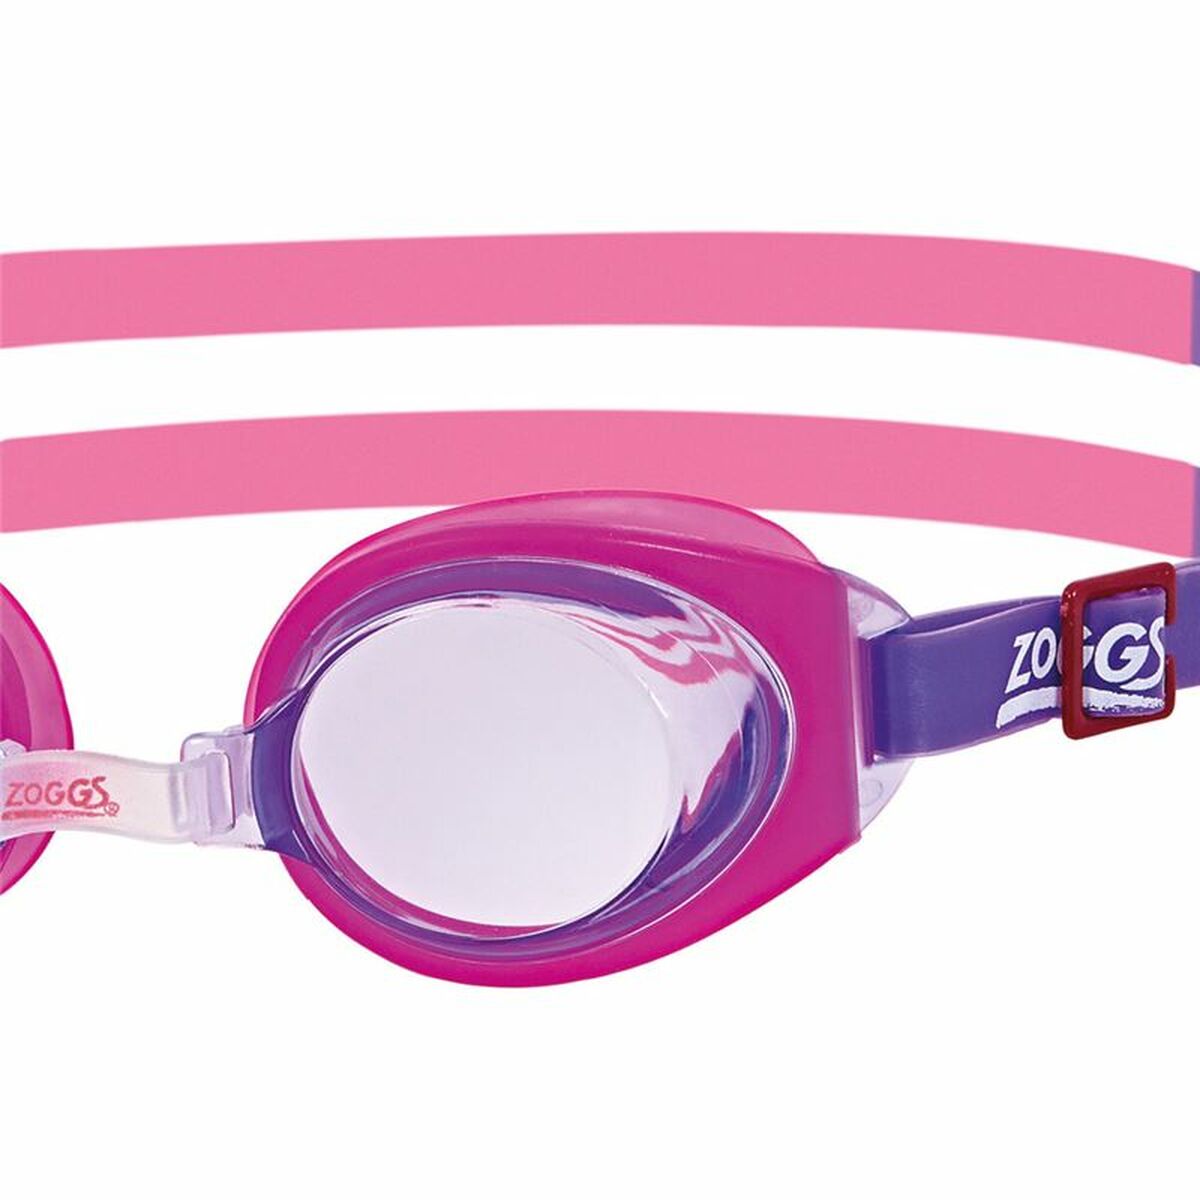 Swimming Goggles Zoggs Little Ripper Pink Kids